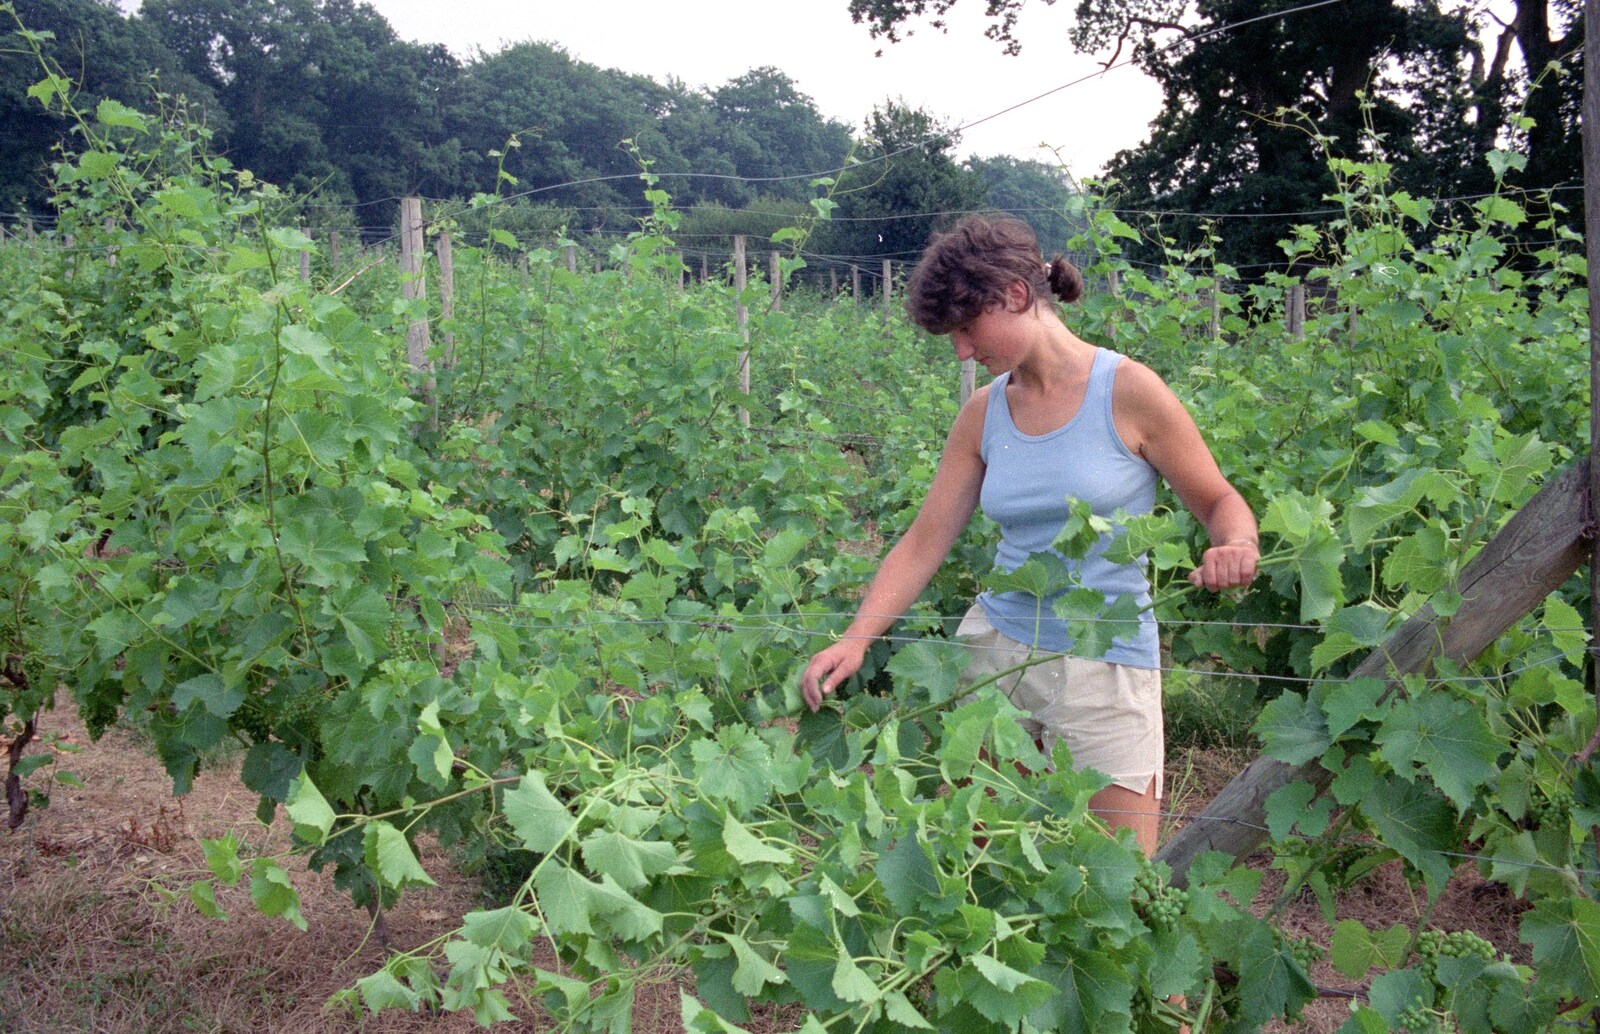 More vine adjustments are made from Back From Uni: Summer Pruning, Bransgore, Dorset - 25th July 1989